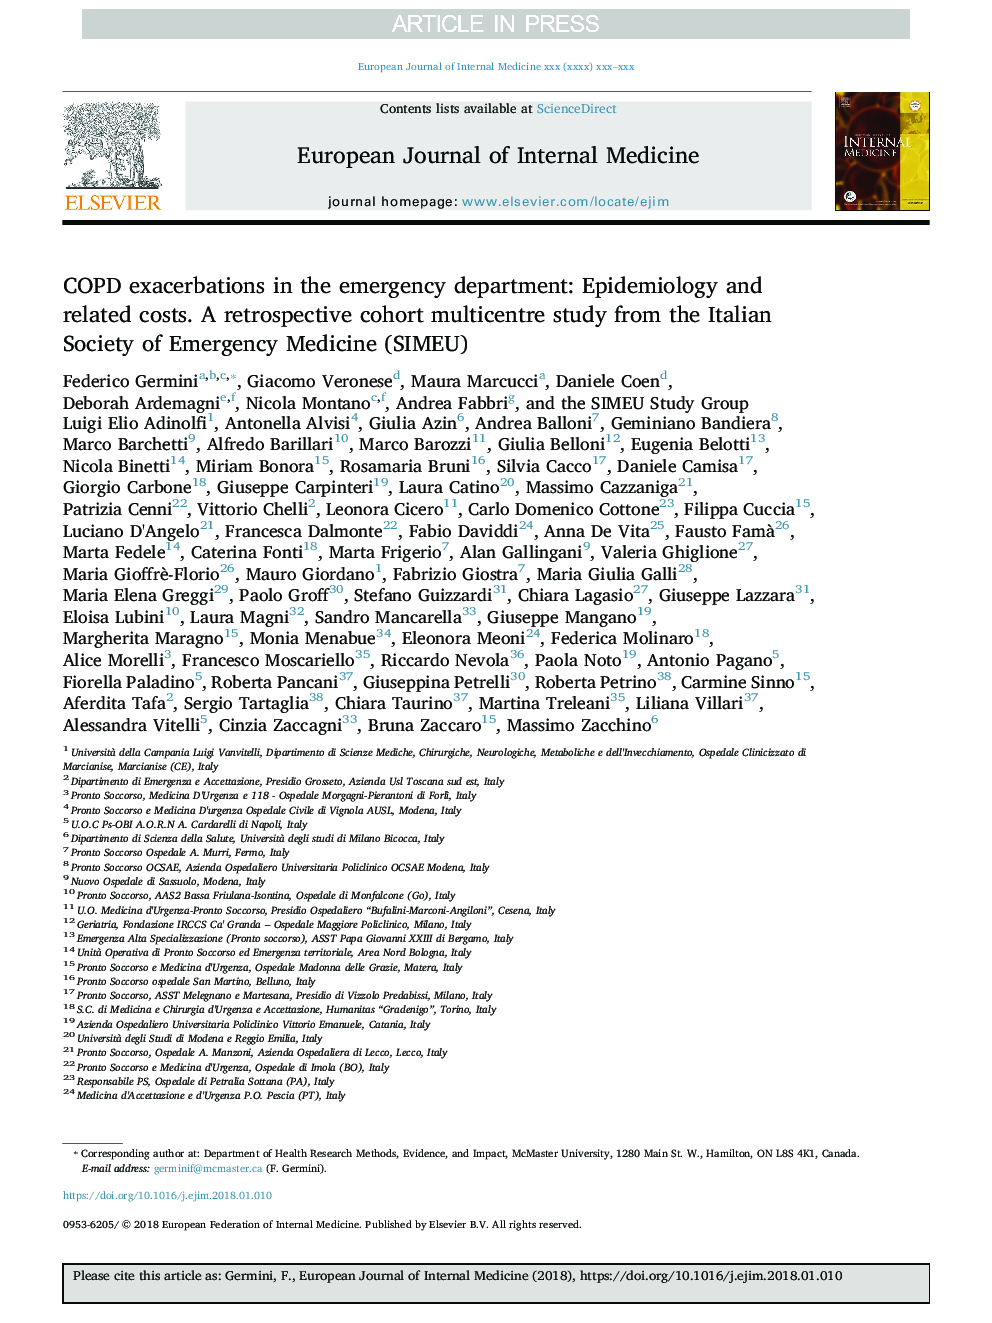 COPD exacerbations in the emergency department: Epidemiology and related costs. A retrospective cohort multicentre study from the Italian Society of Emergency Medicine (SIMEU)